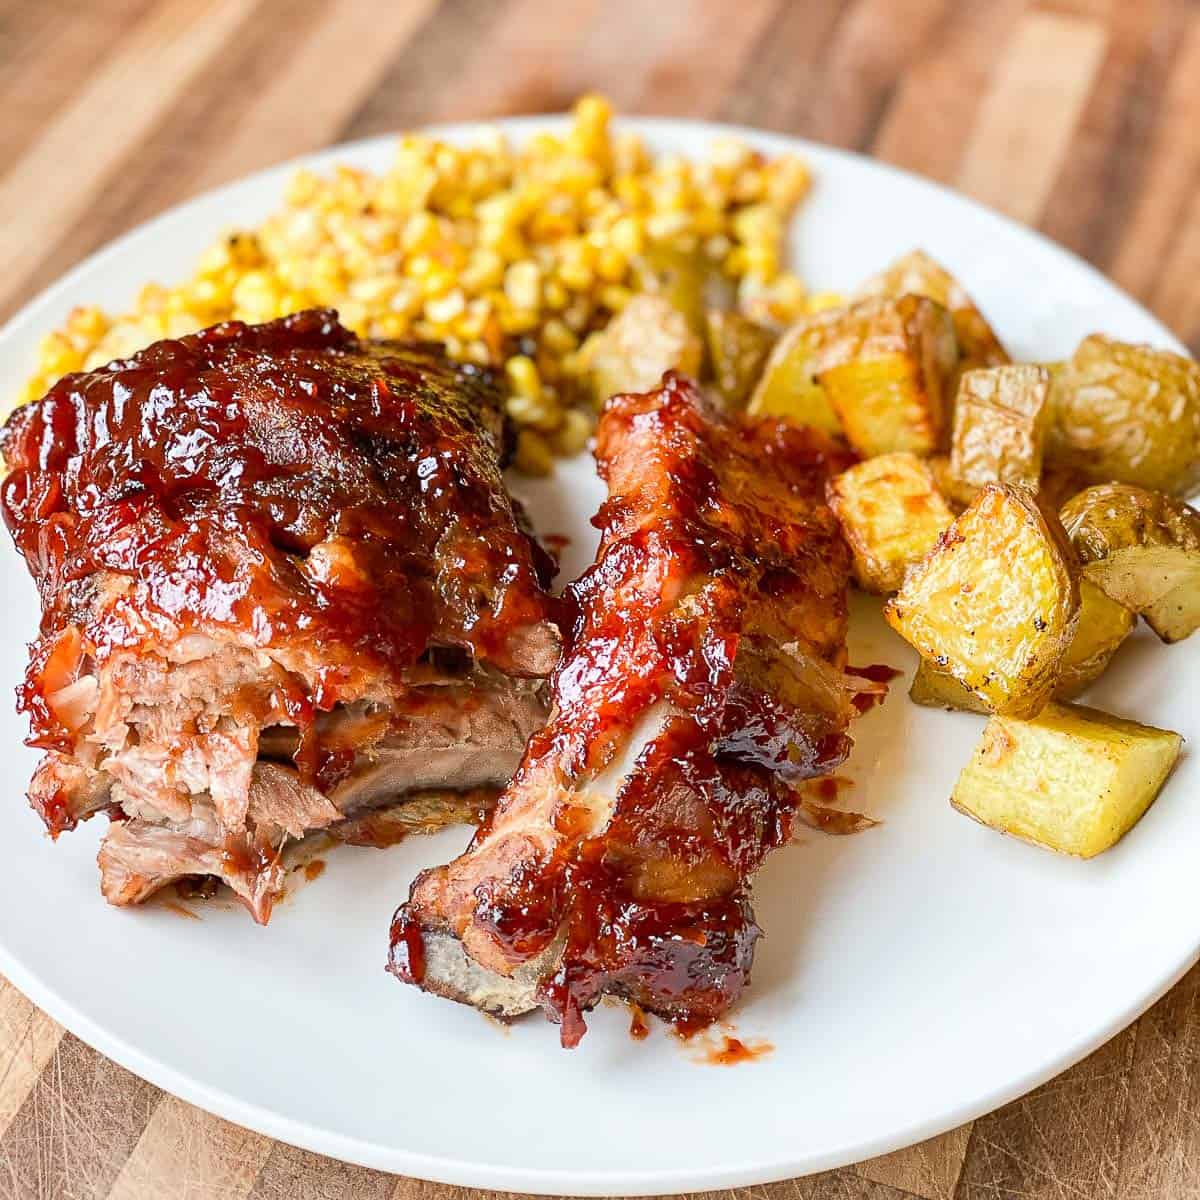 Oven Baked Ribs served on a white plate with Fried Corn and Roasted Potatoes.